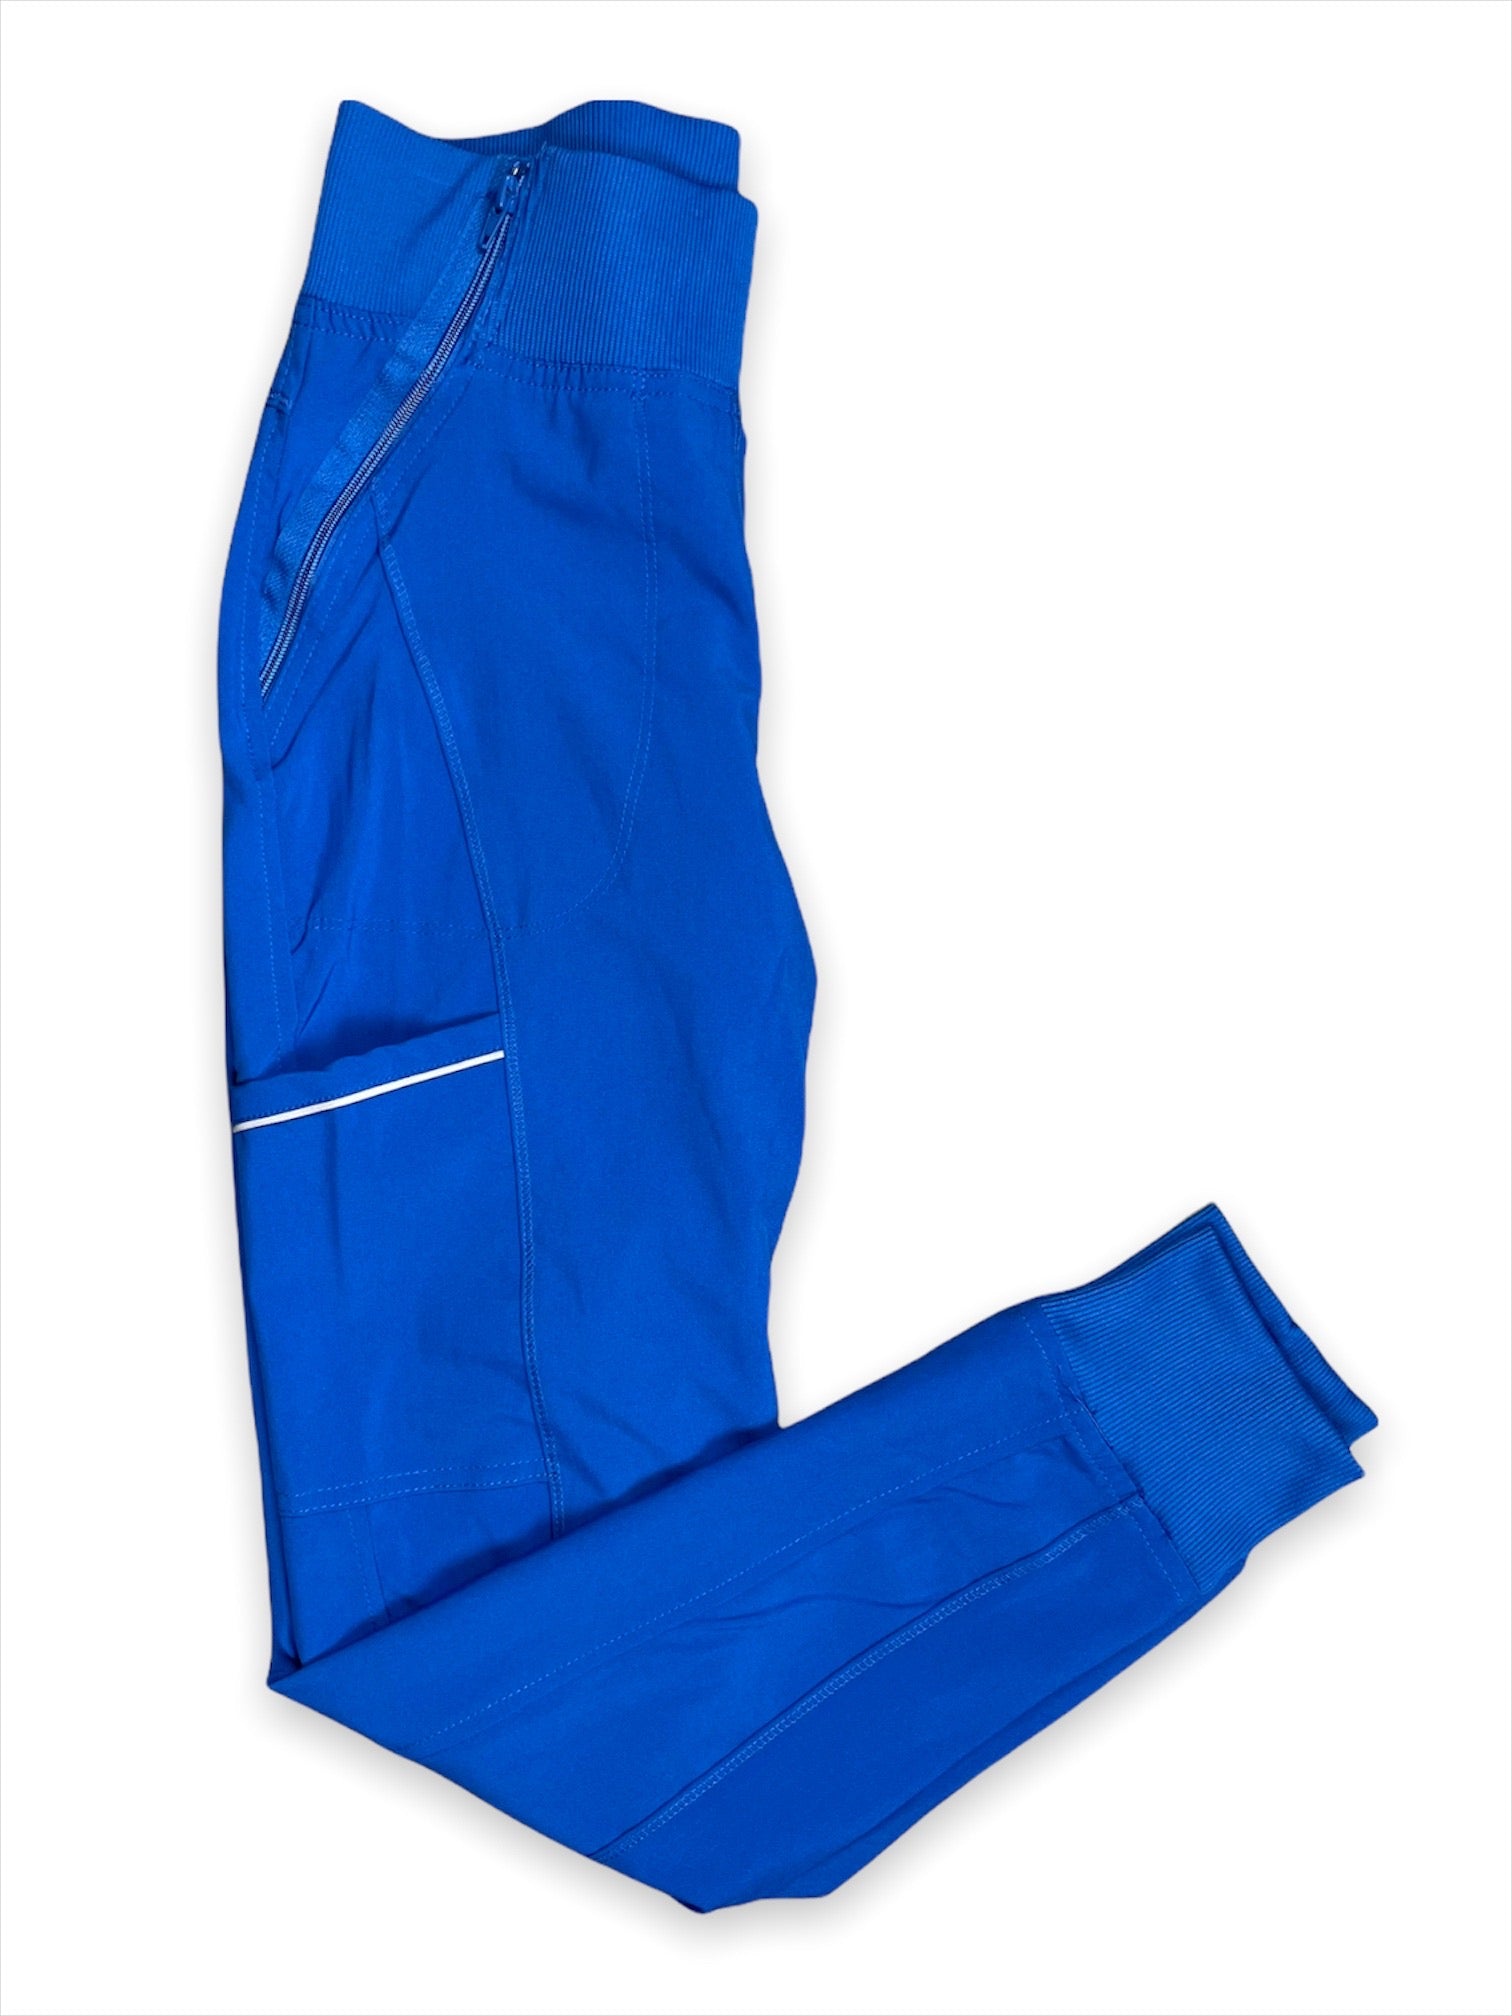 AE, Lab360° Tapered Joggers - Goblin Blue, Workout Pants Women